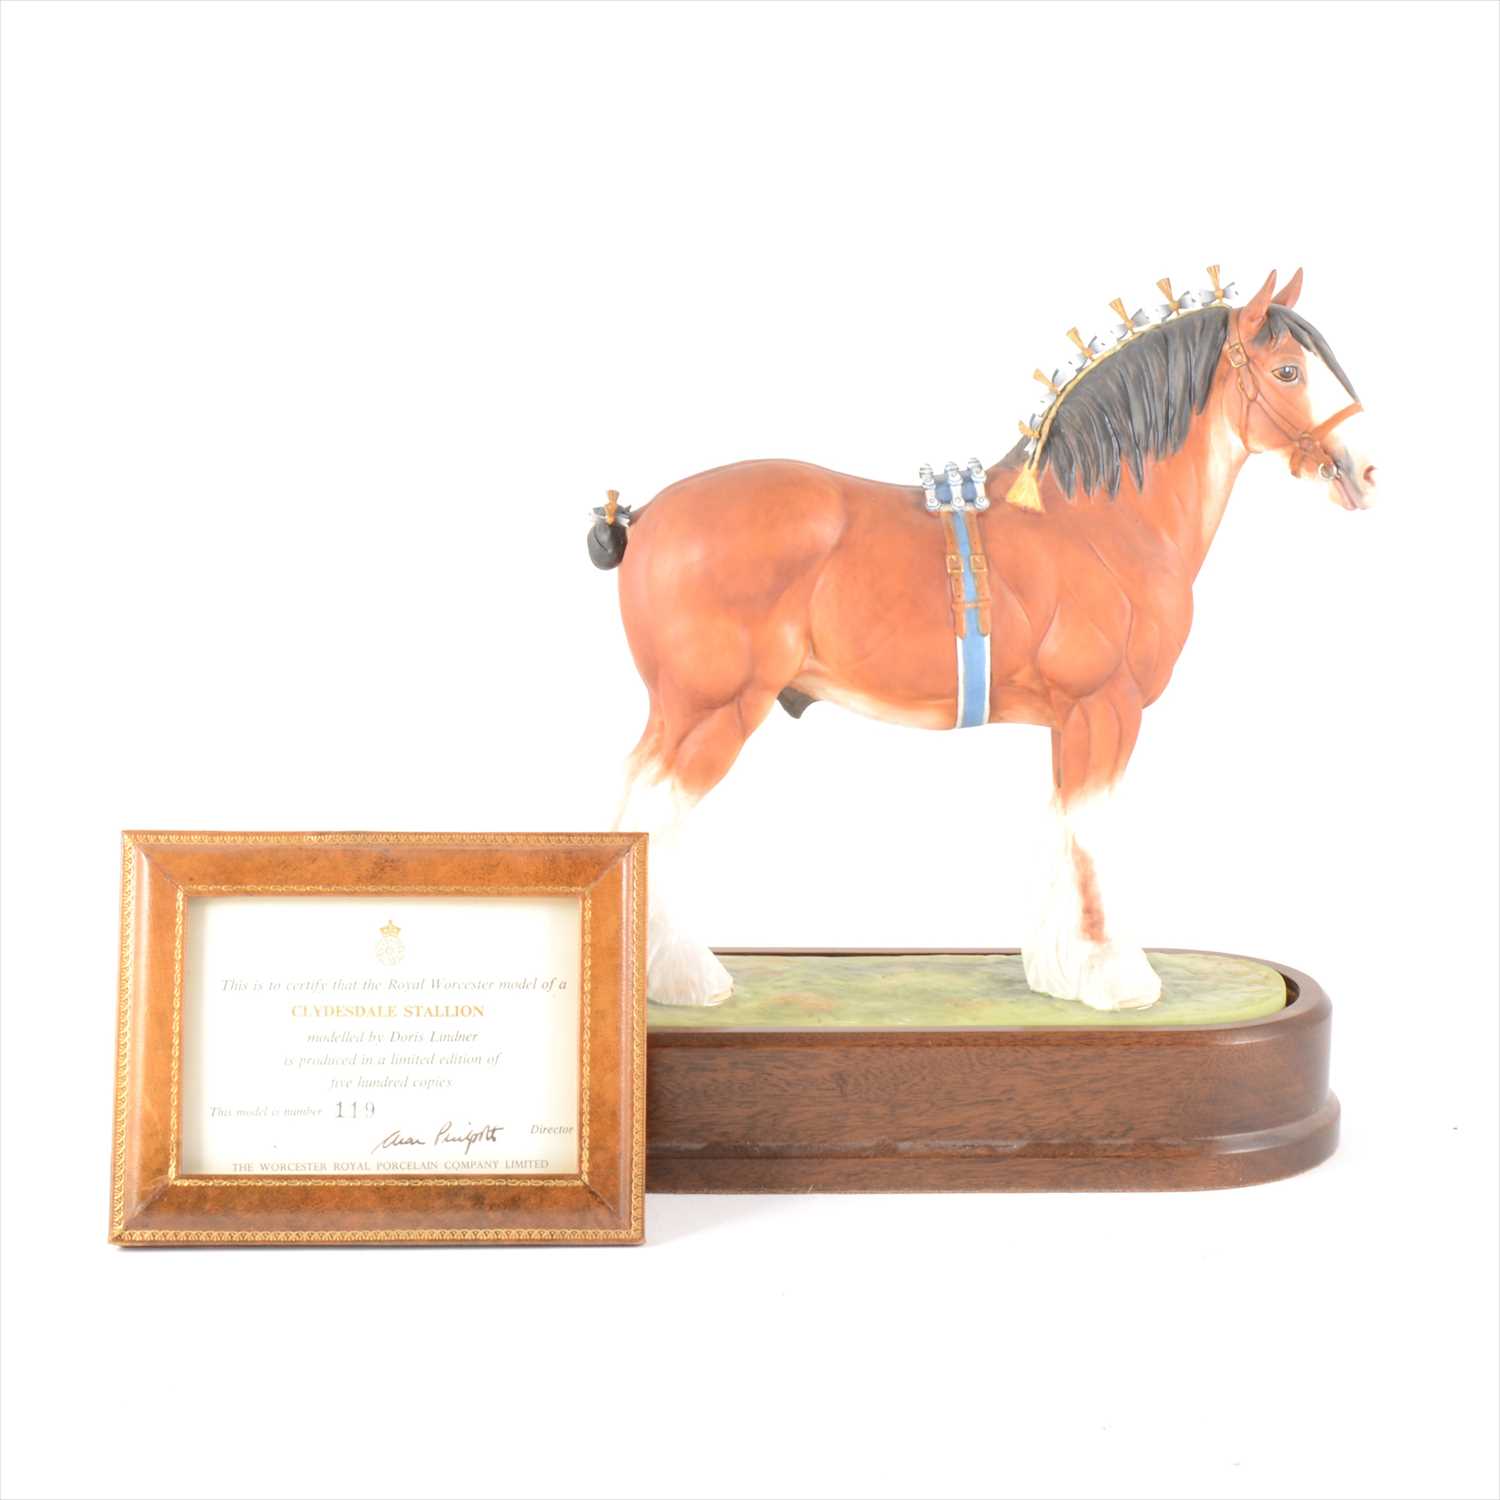 Lot 29 - A Royal Worcester limited edition horse model, "Clydesdale Stallion", by Doris Lindner